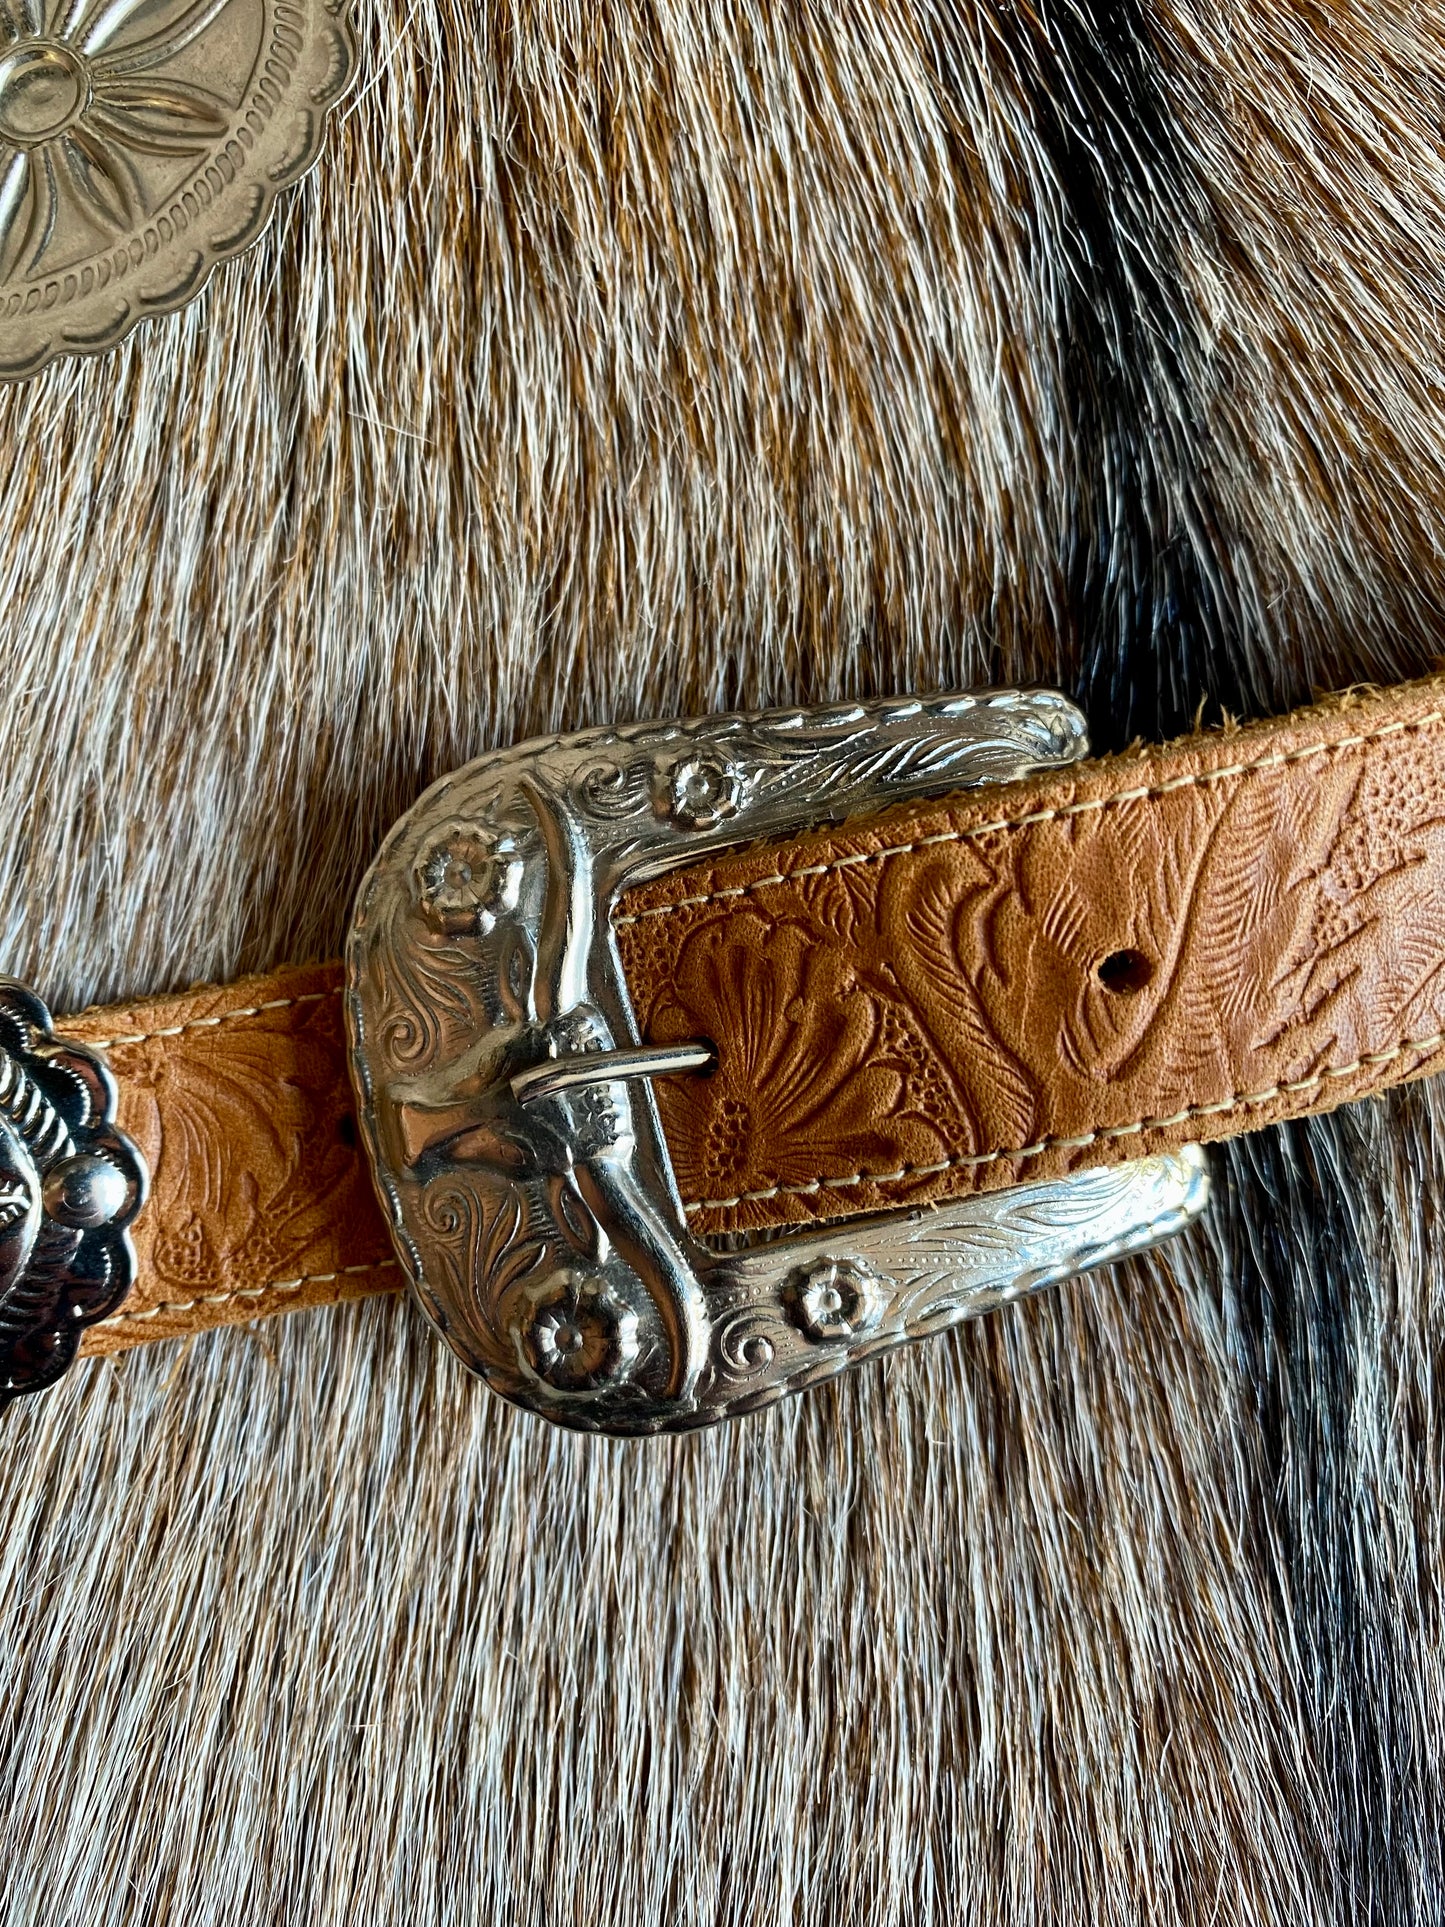 Vintage Tan Leather Tooled Silver Concho Western Belt